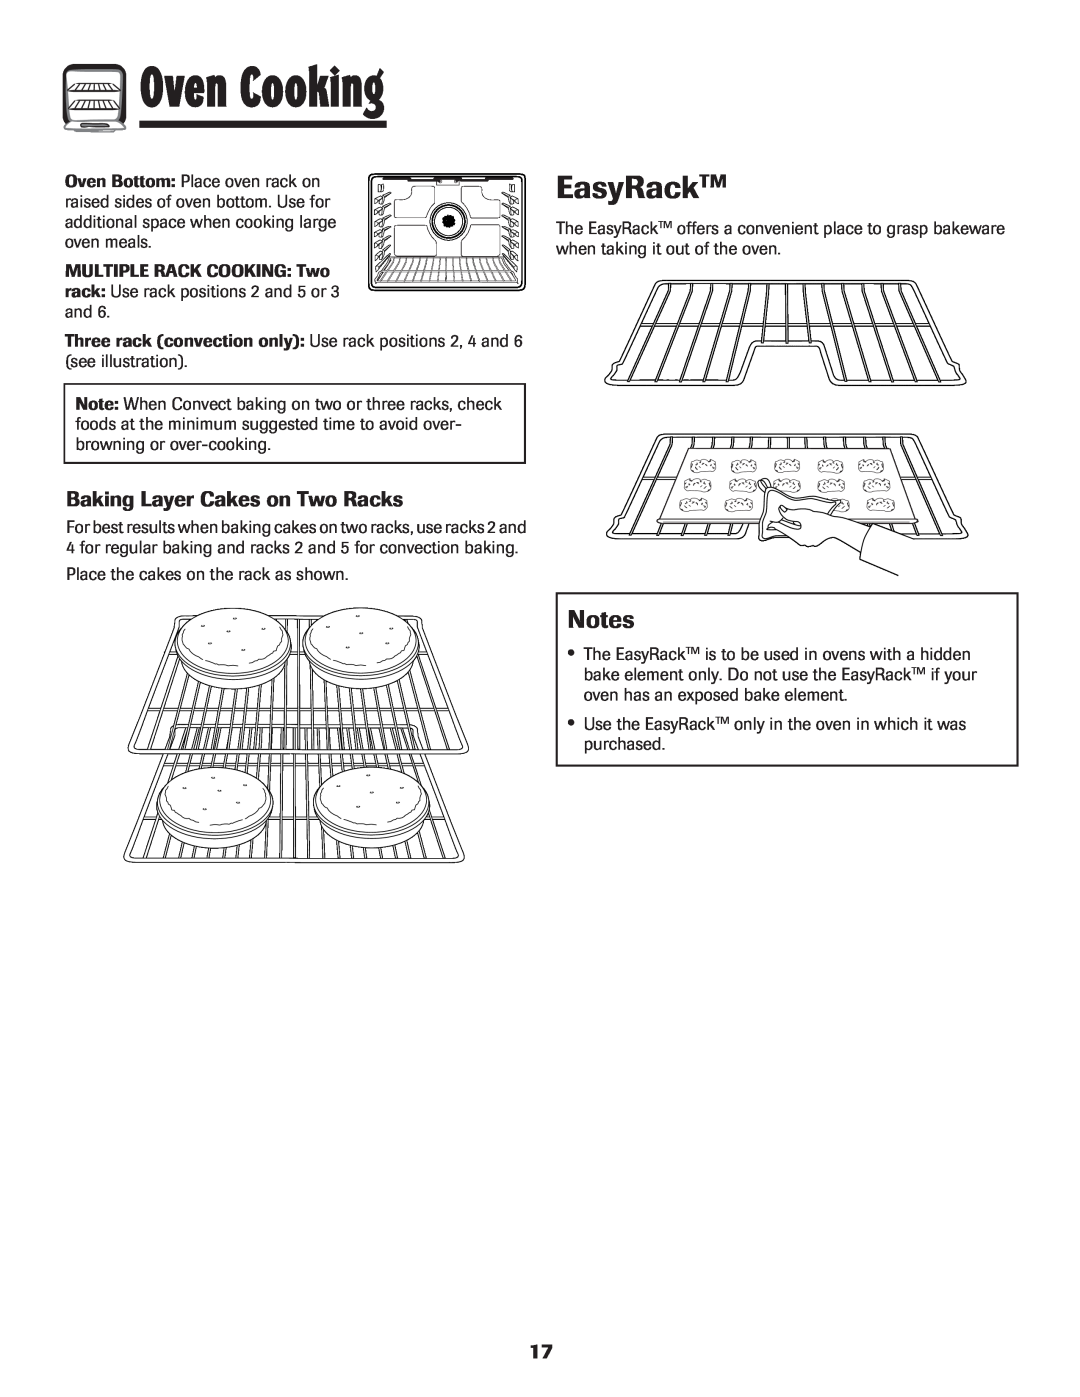 Amana 8113P487-60 important safety instructions EasyRackTM, Baking Layer Cakes on Two Racks, Oven Cooking 